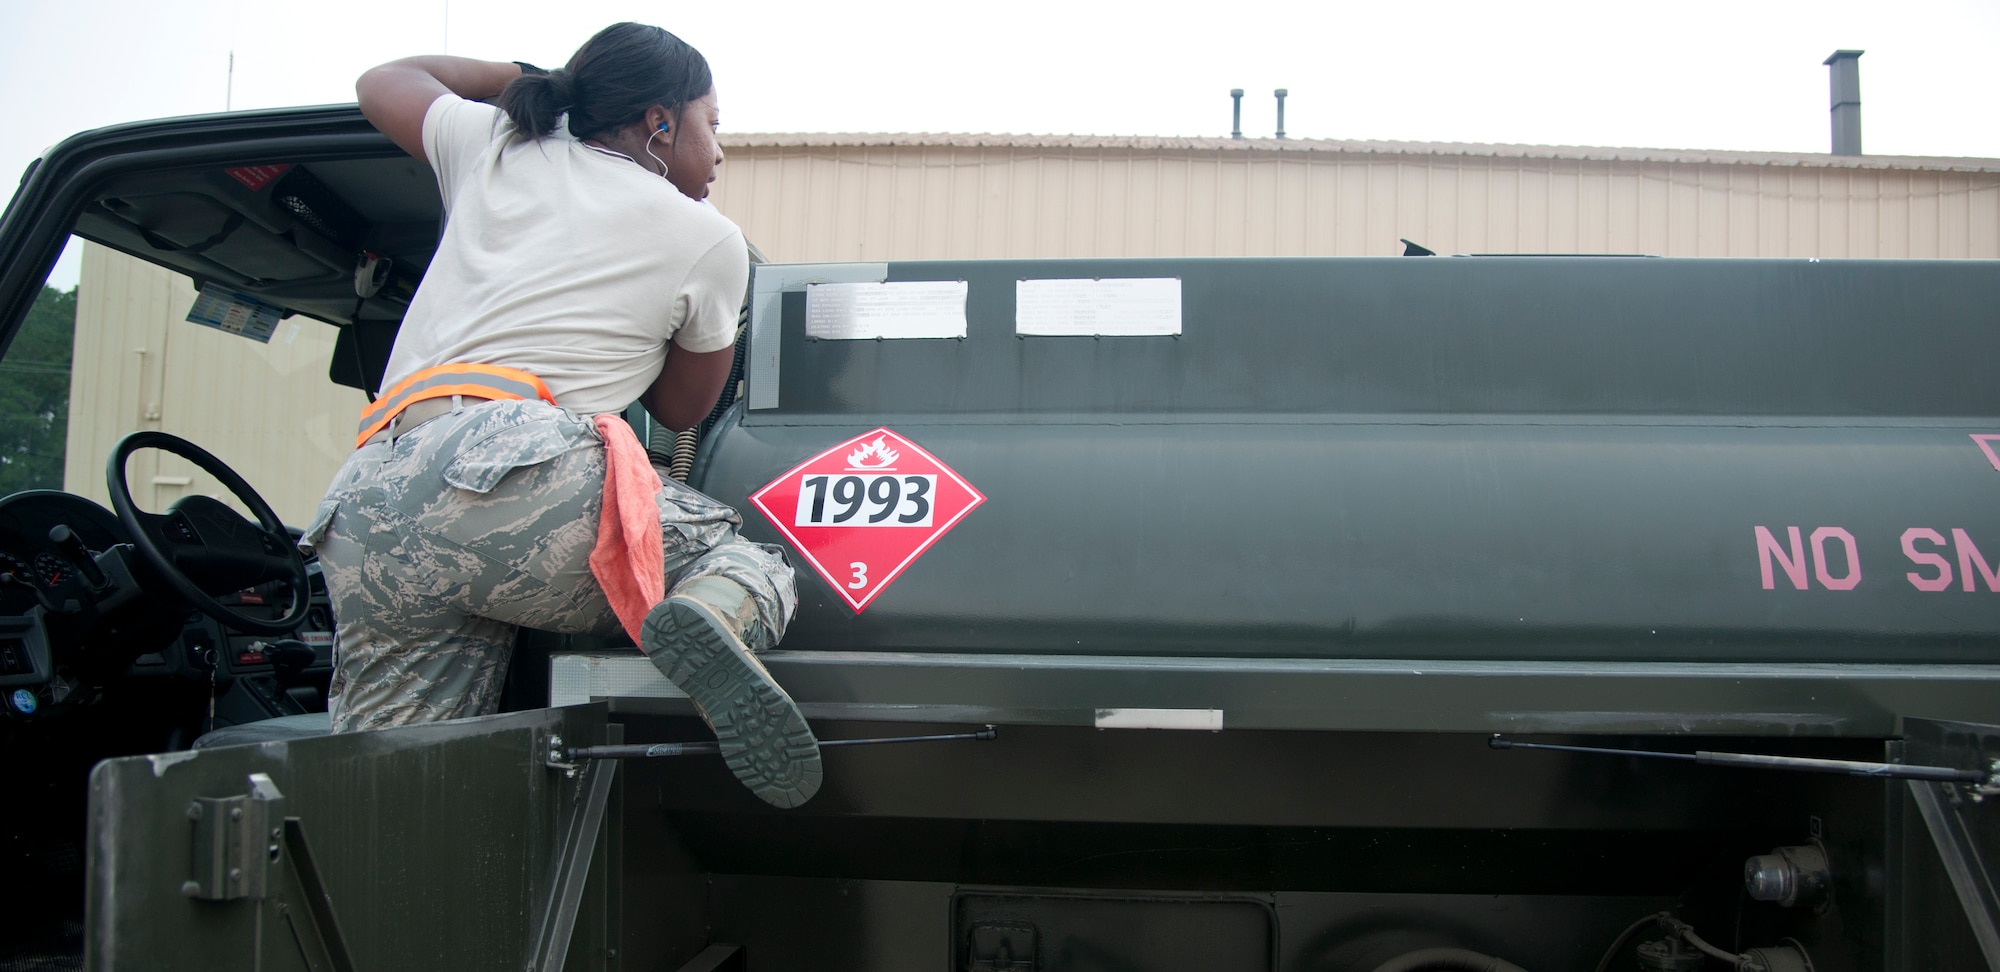 U.S. Air Force Airman 1st Class Clarissa Fields, 23d Logistics Readiness Squadron petroleum, oils and lubricants, fuels a truck during a routine check at Moody Air Force Base, Ga., Aug. 7, 2012. POL is responsible for providing clean, dry fuel to aircraft assigned to Moody. (U.S. Air Force photo by Airman 1st Class Paul Francis/Released)
